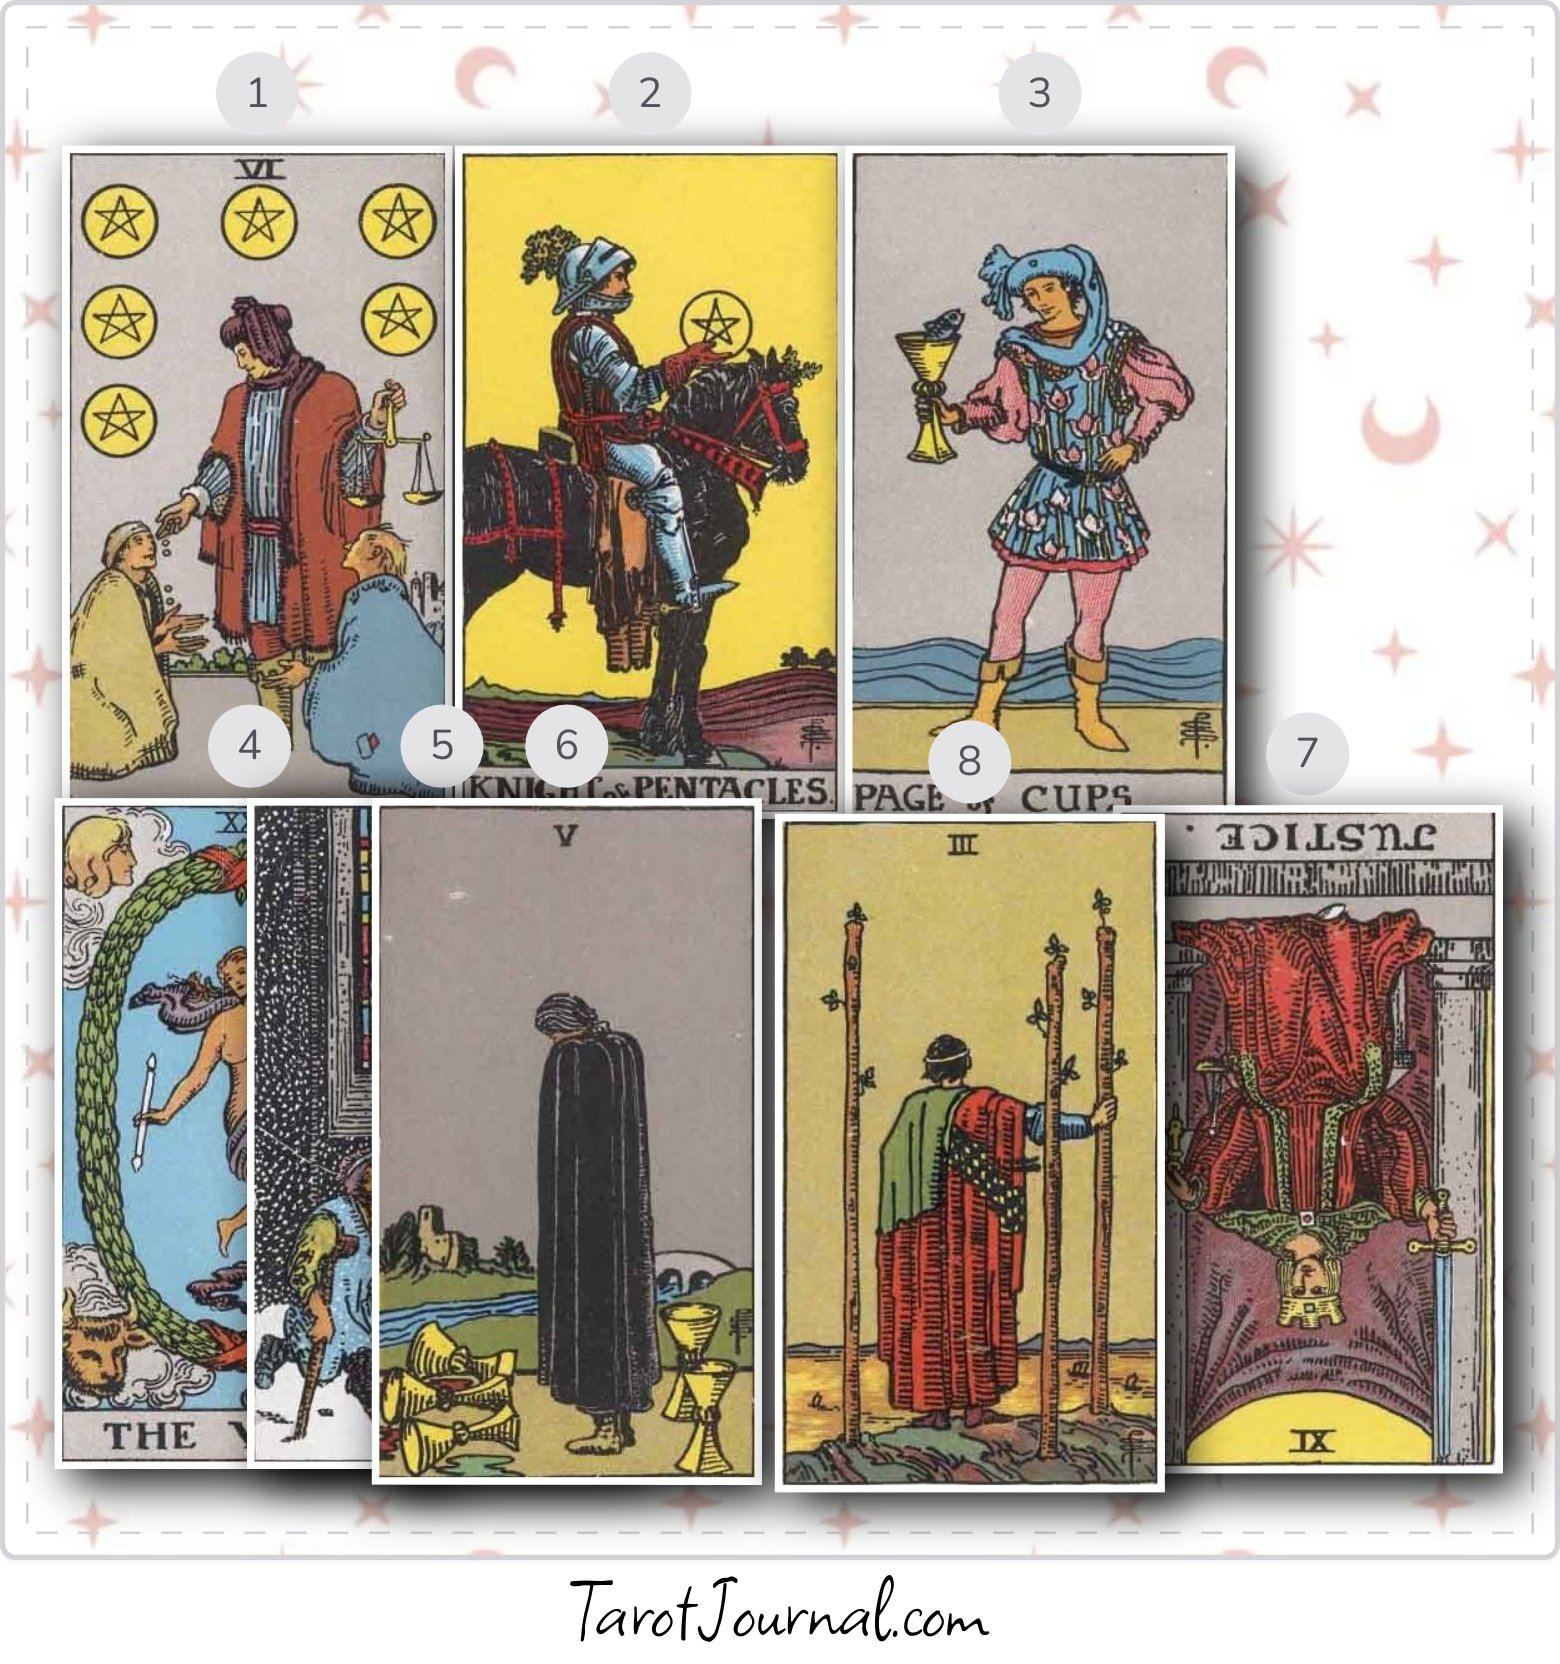 First tarot read (learning) what would this mean? - tarot reading by Harmon